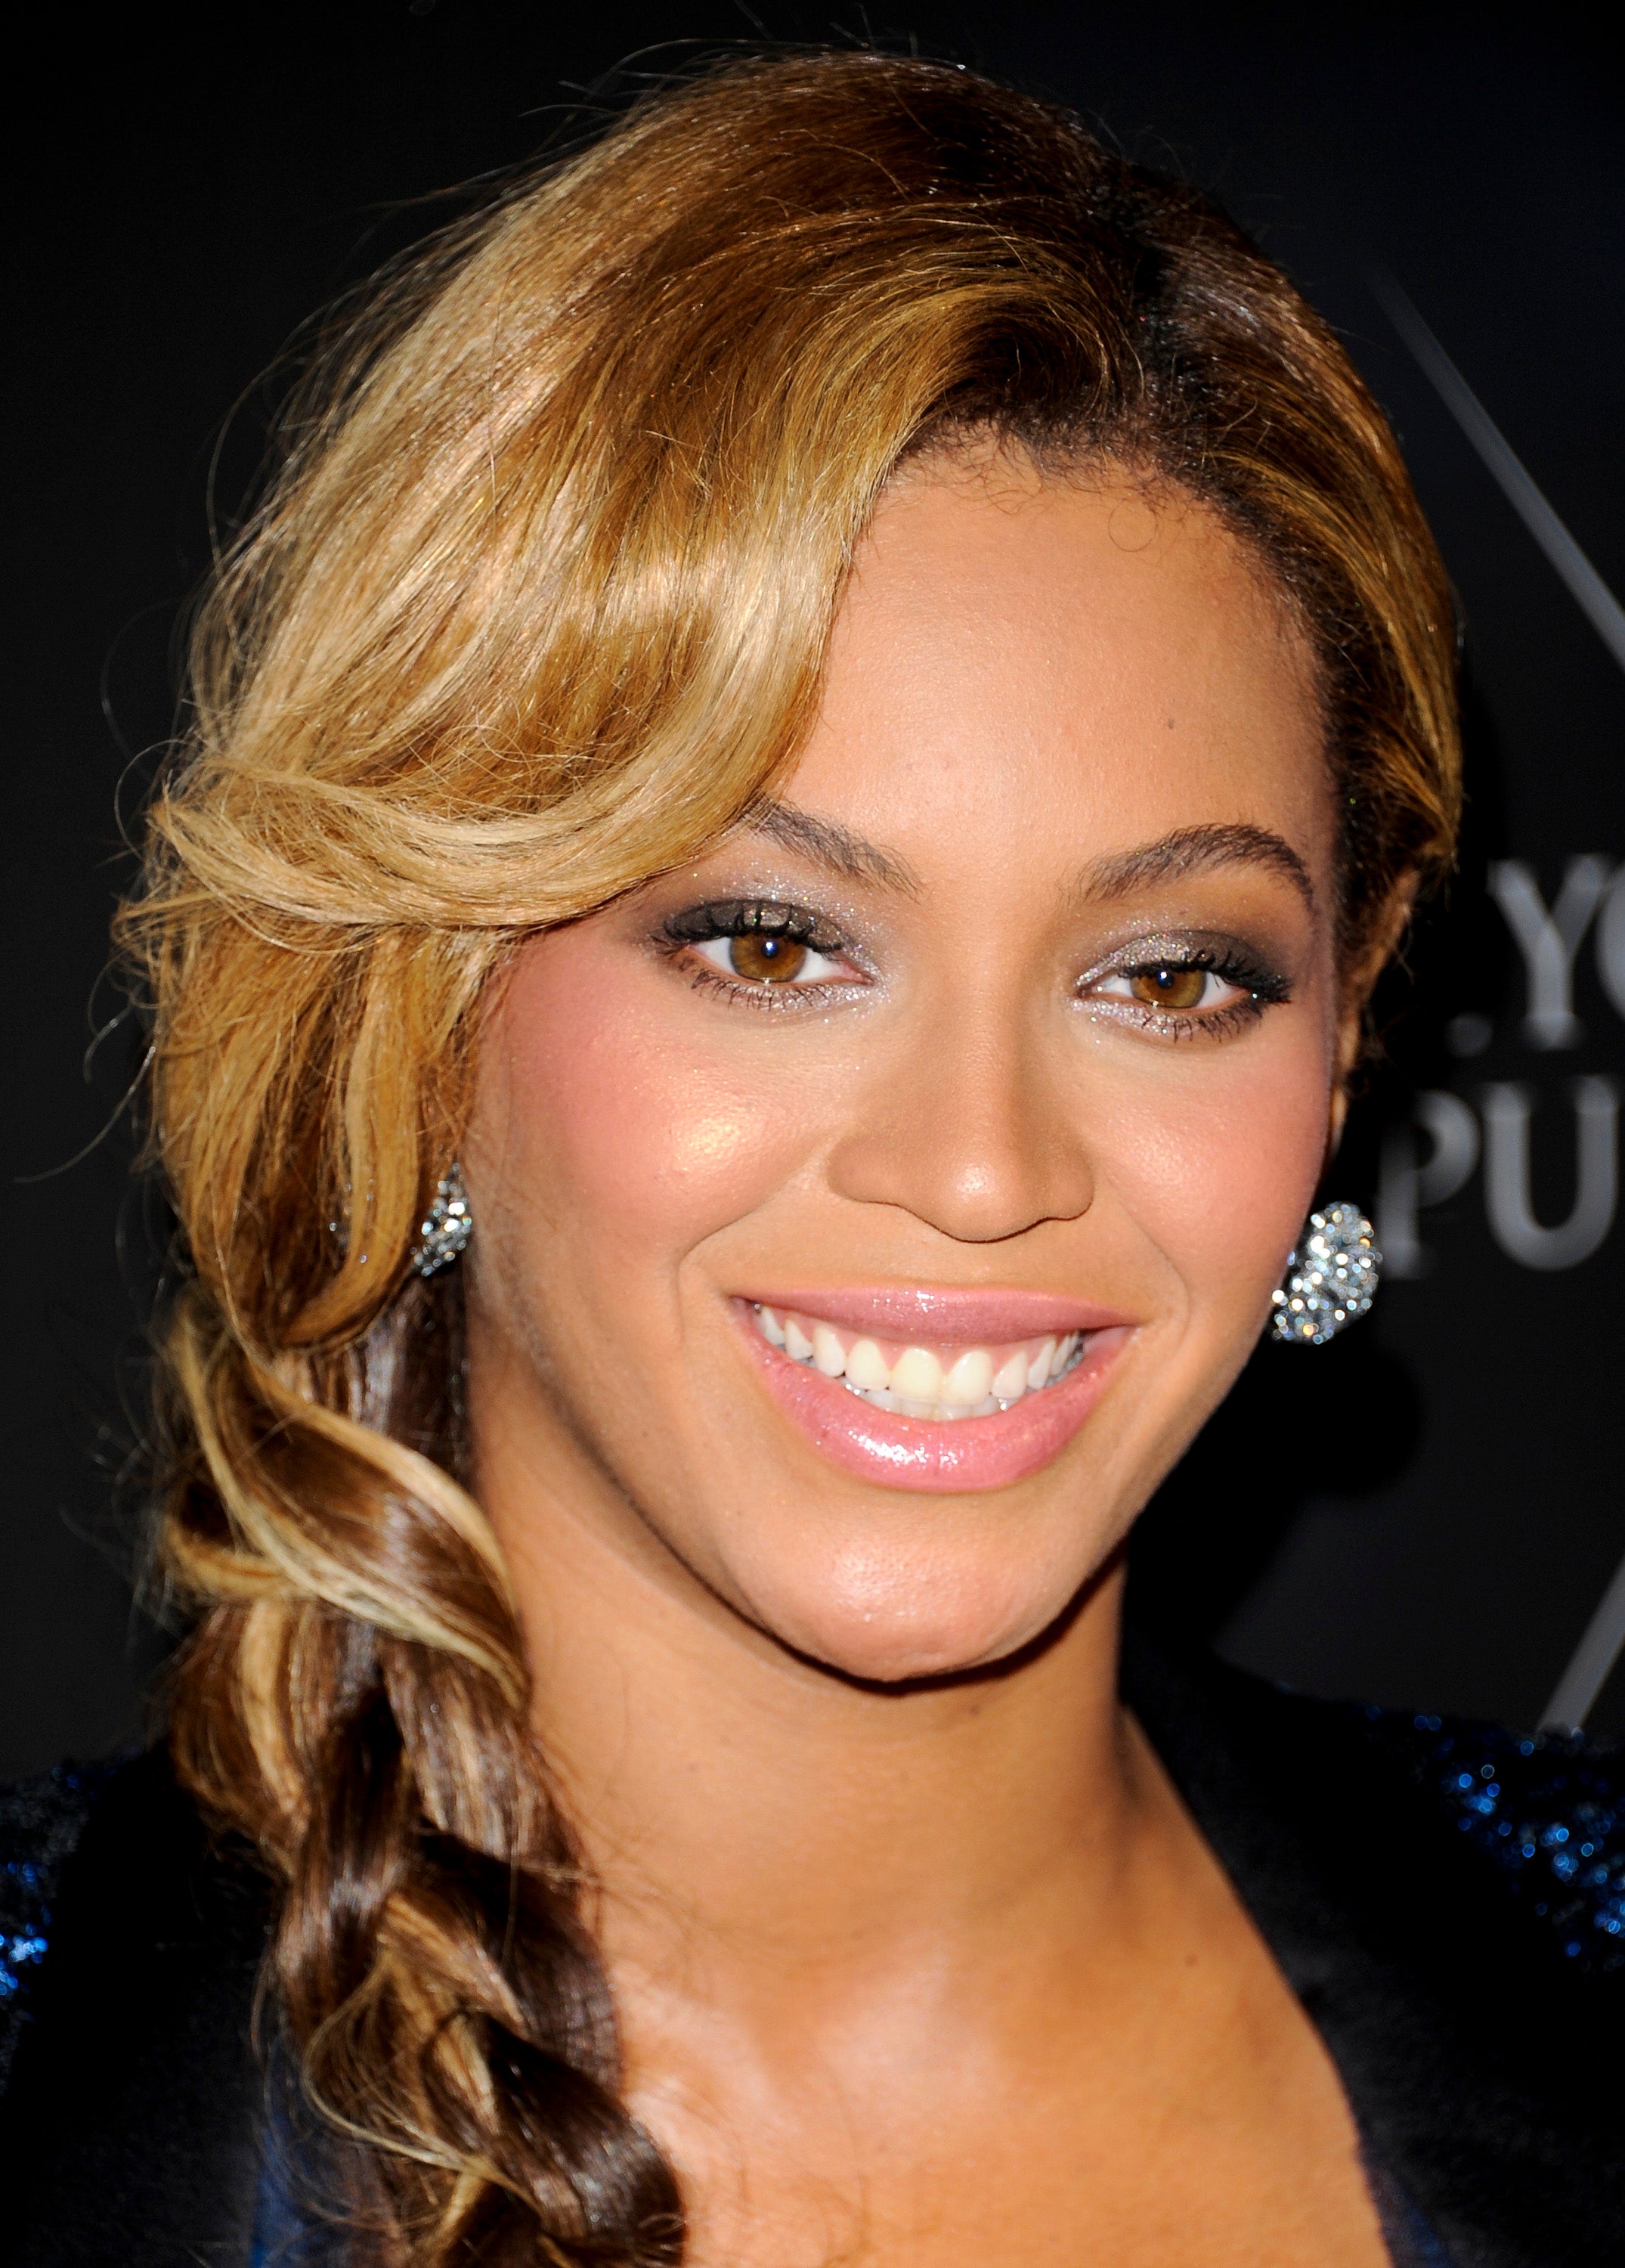 Houston Fans to Build Monument for Beyonce